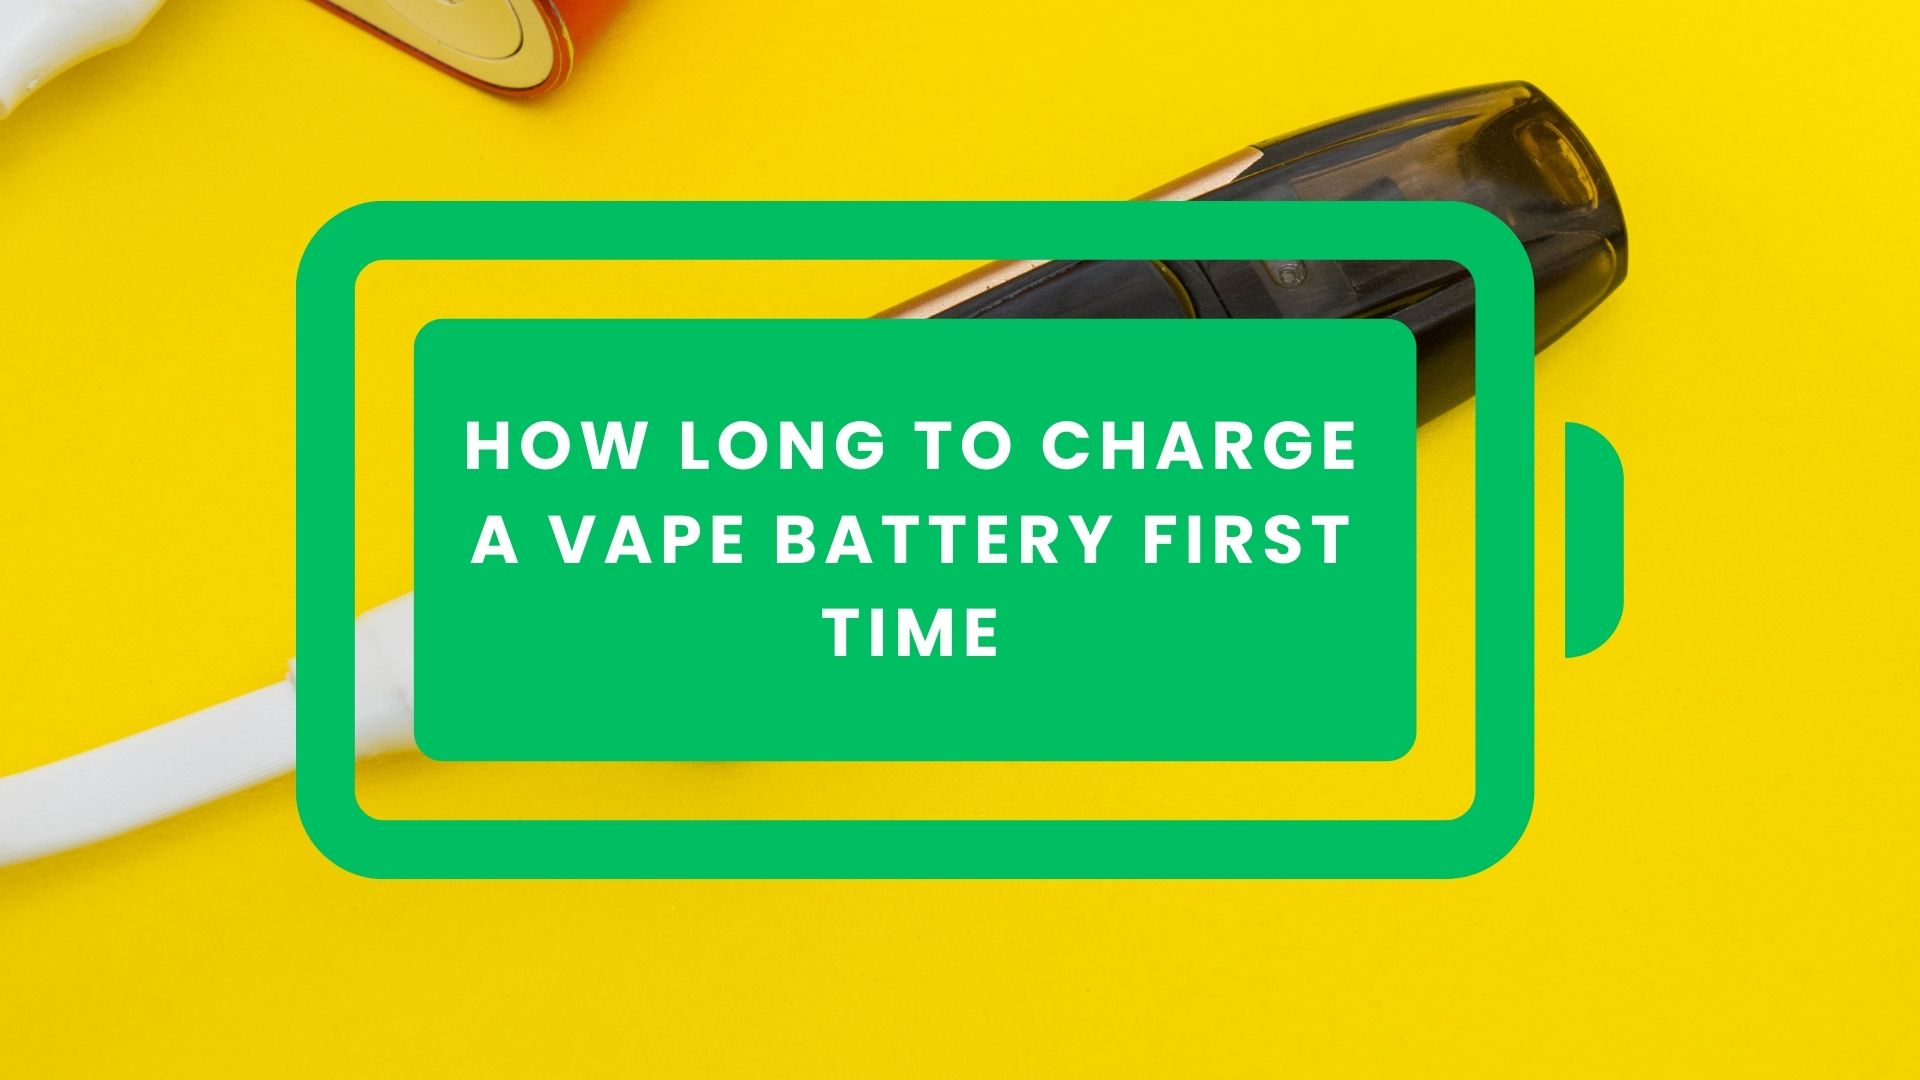 How Long to Charge a Vape Battery First Time